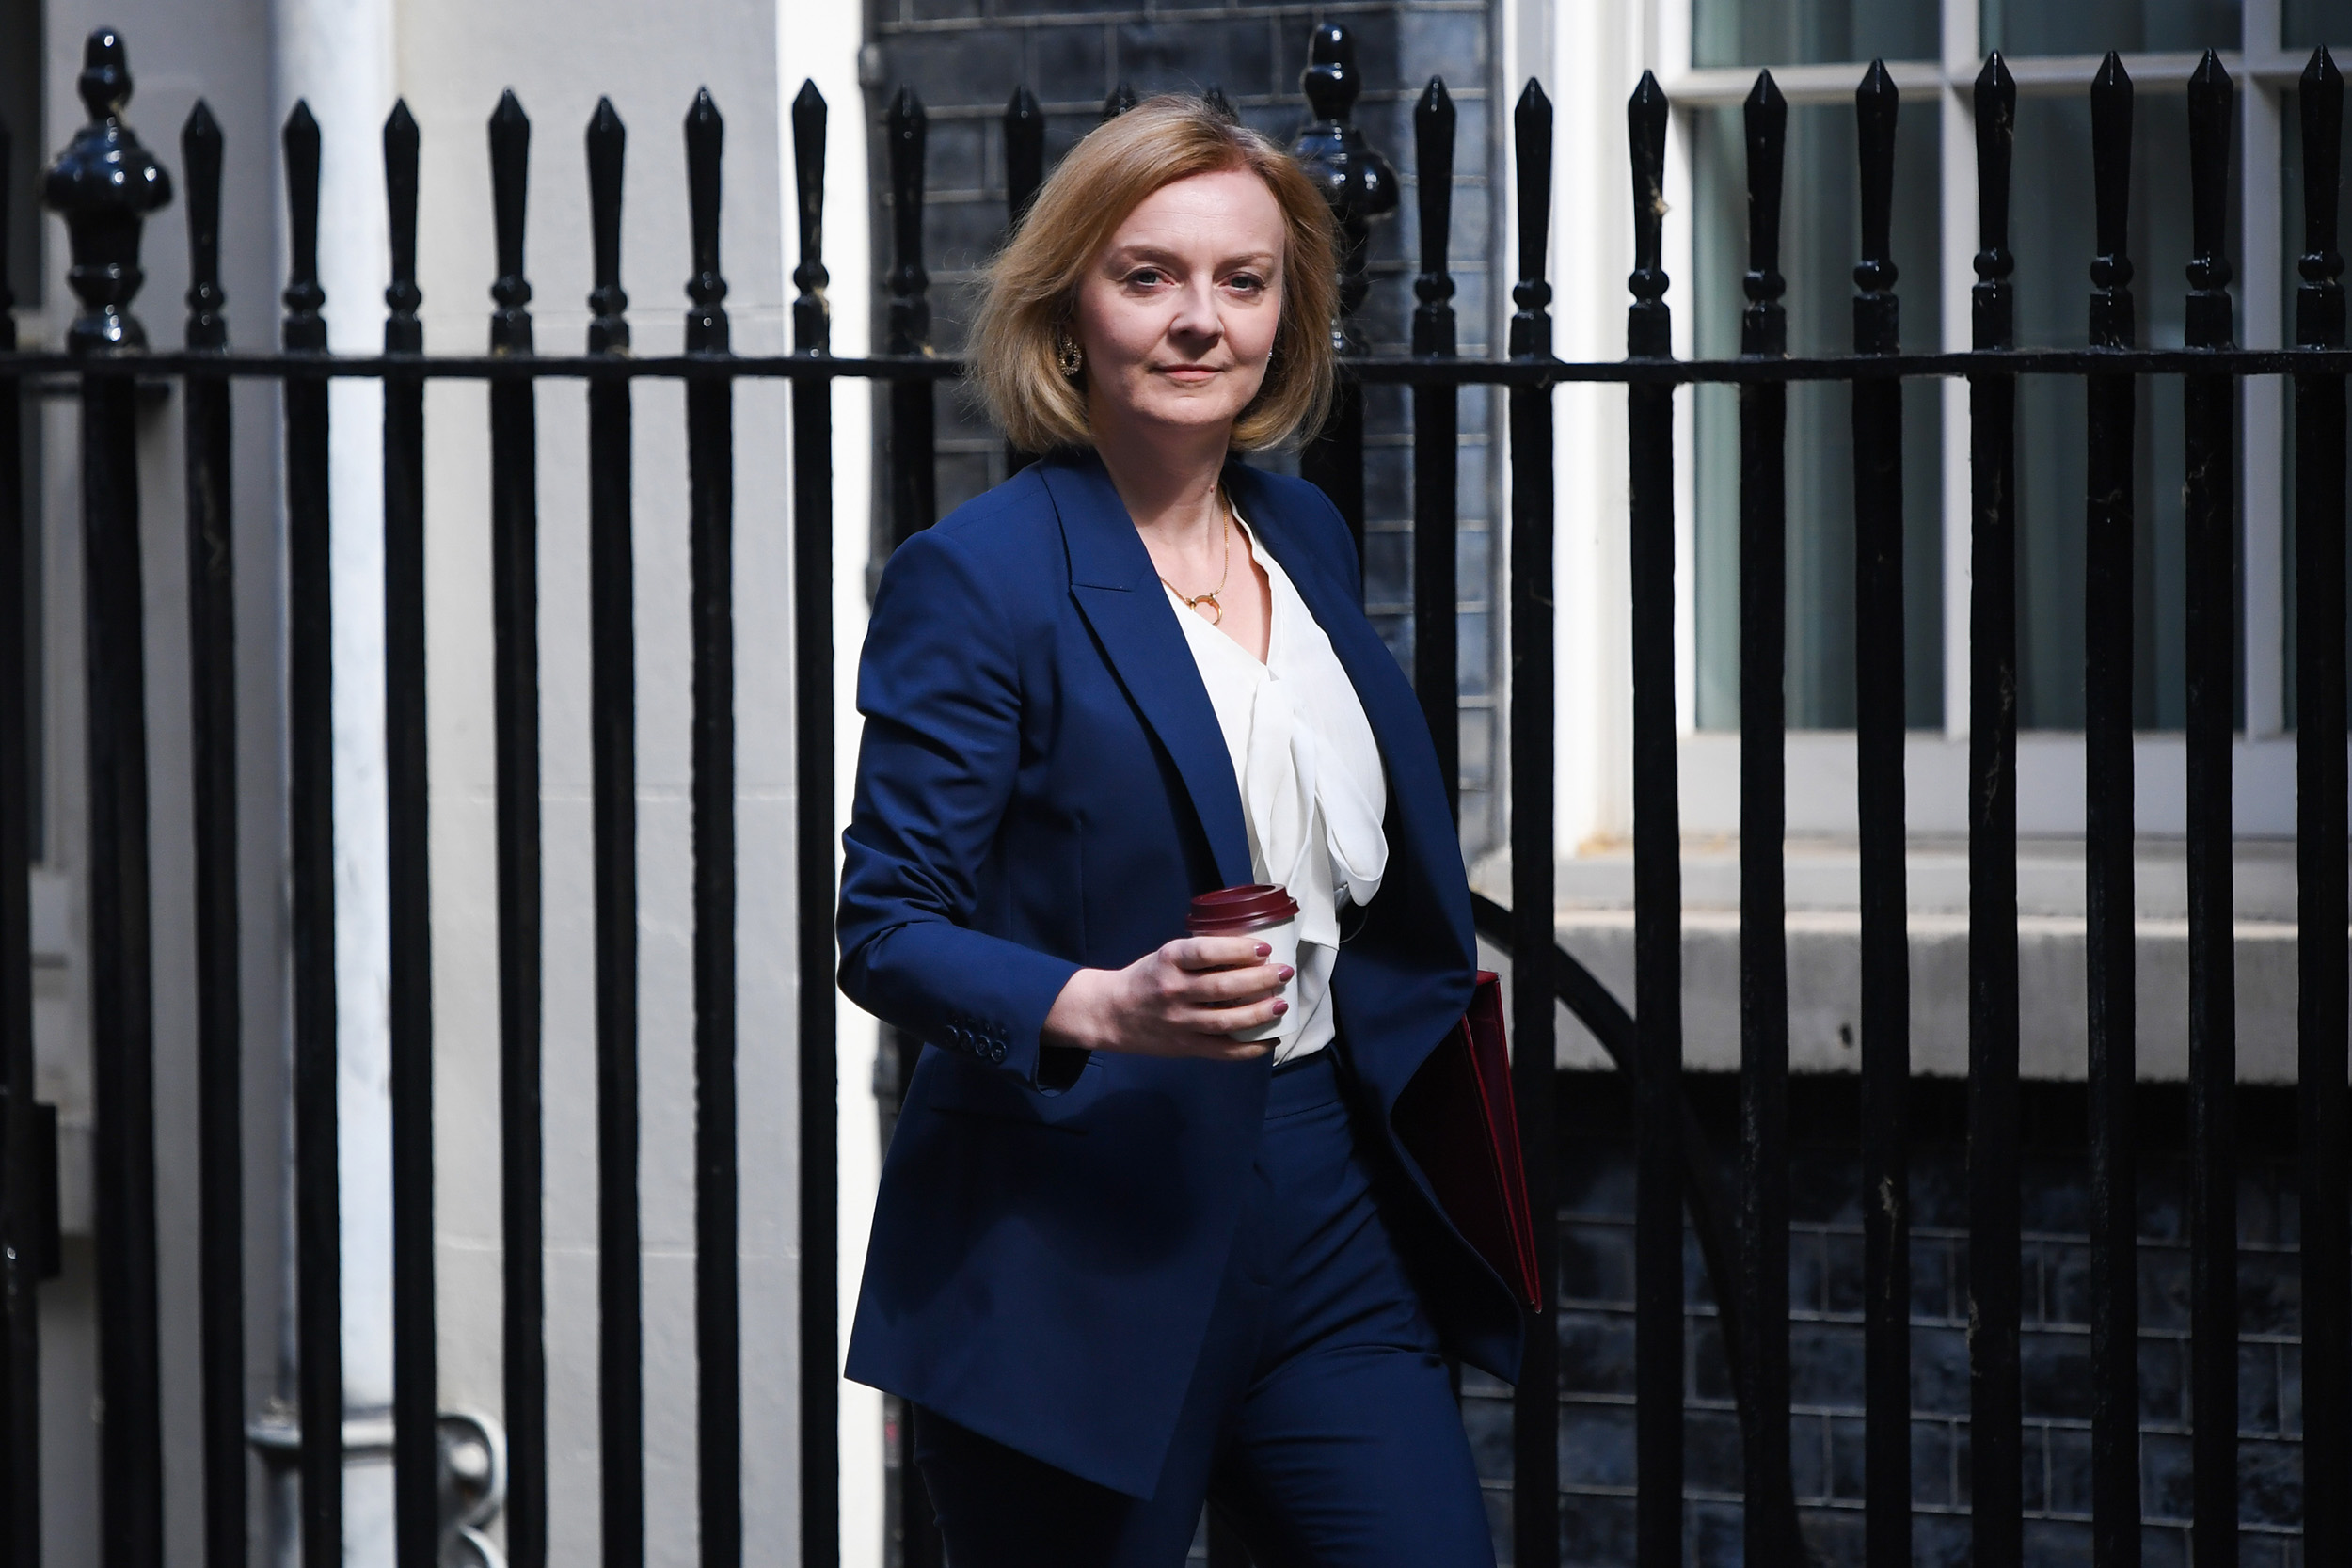 Liz Truss, UK foreign secretary, arrives for a weekly meeting of cabinet ministers at 10 Downing Street in London, England, on July 5.